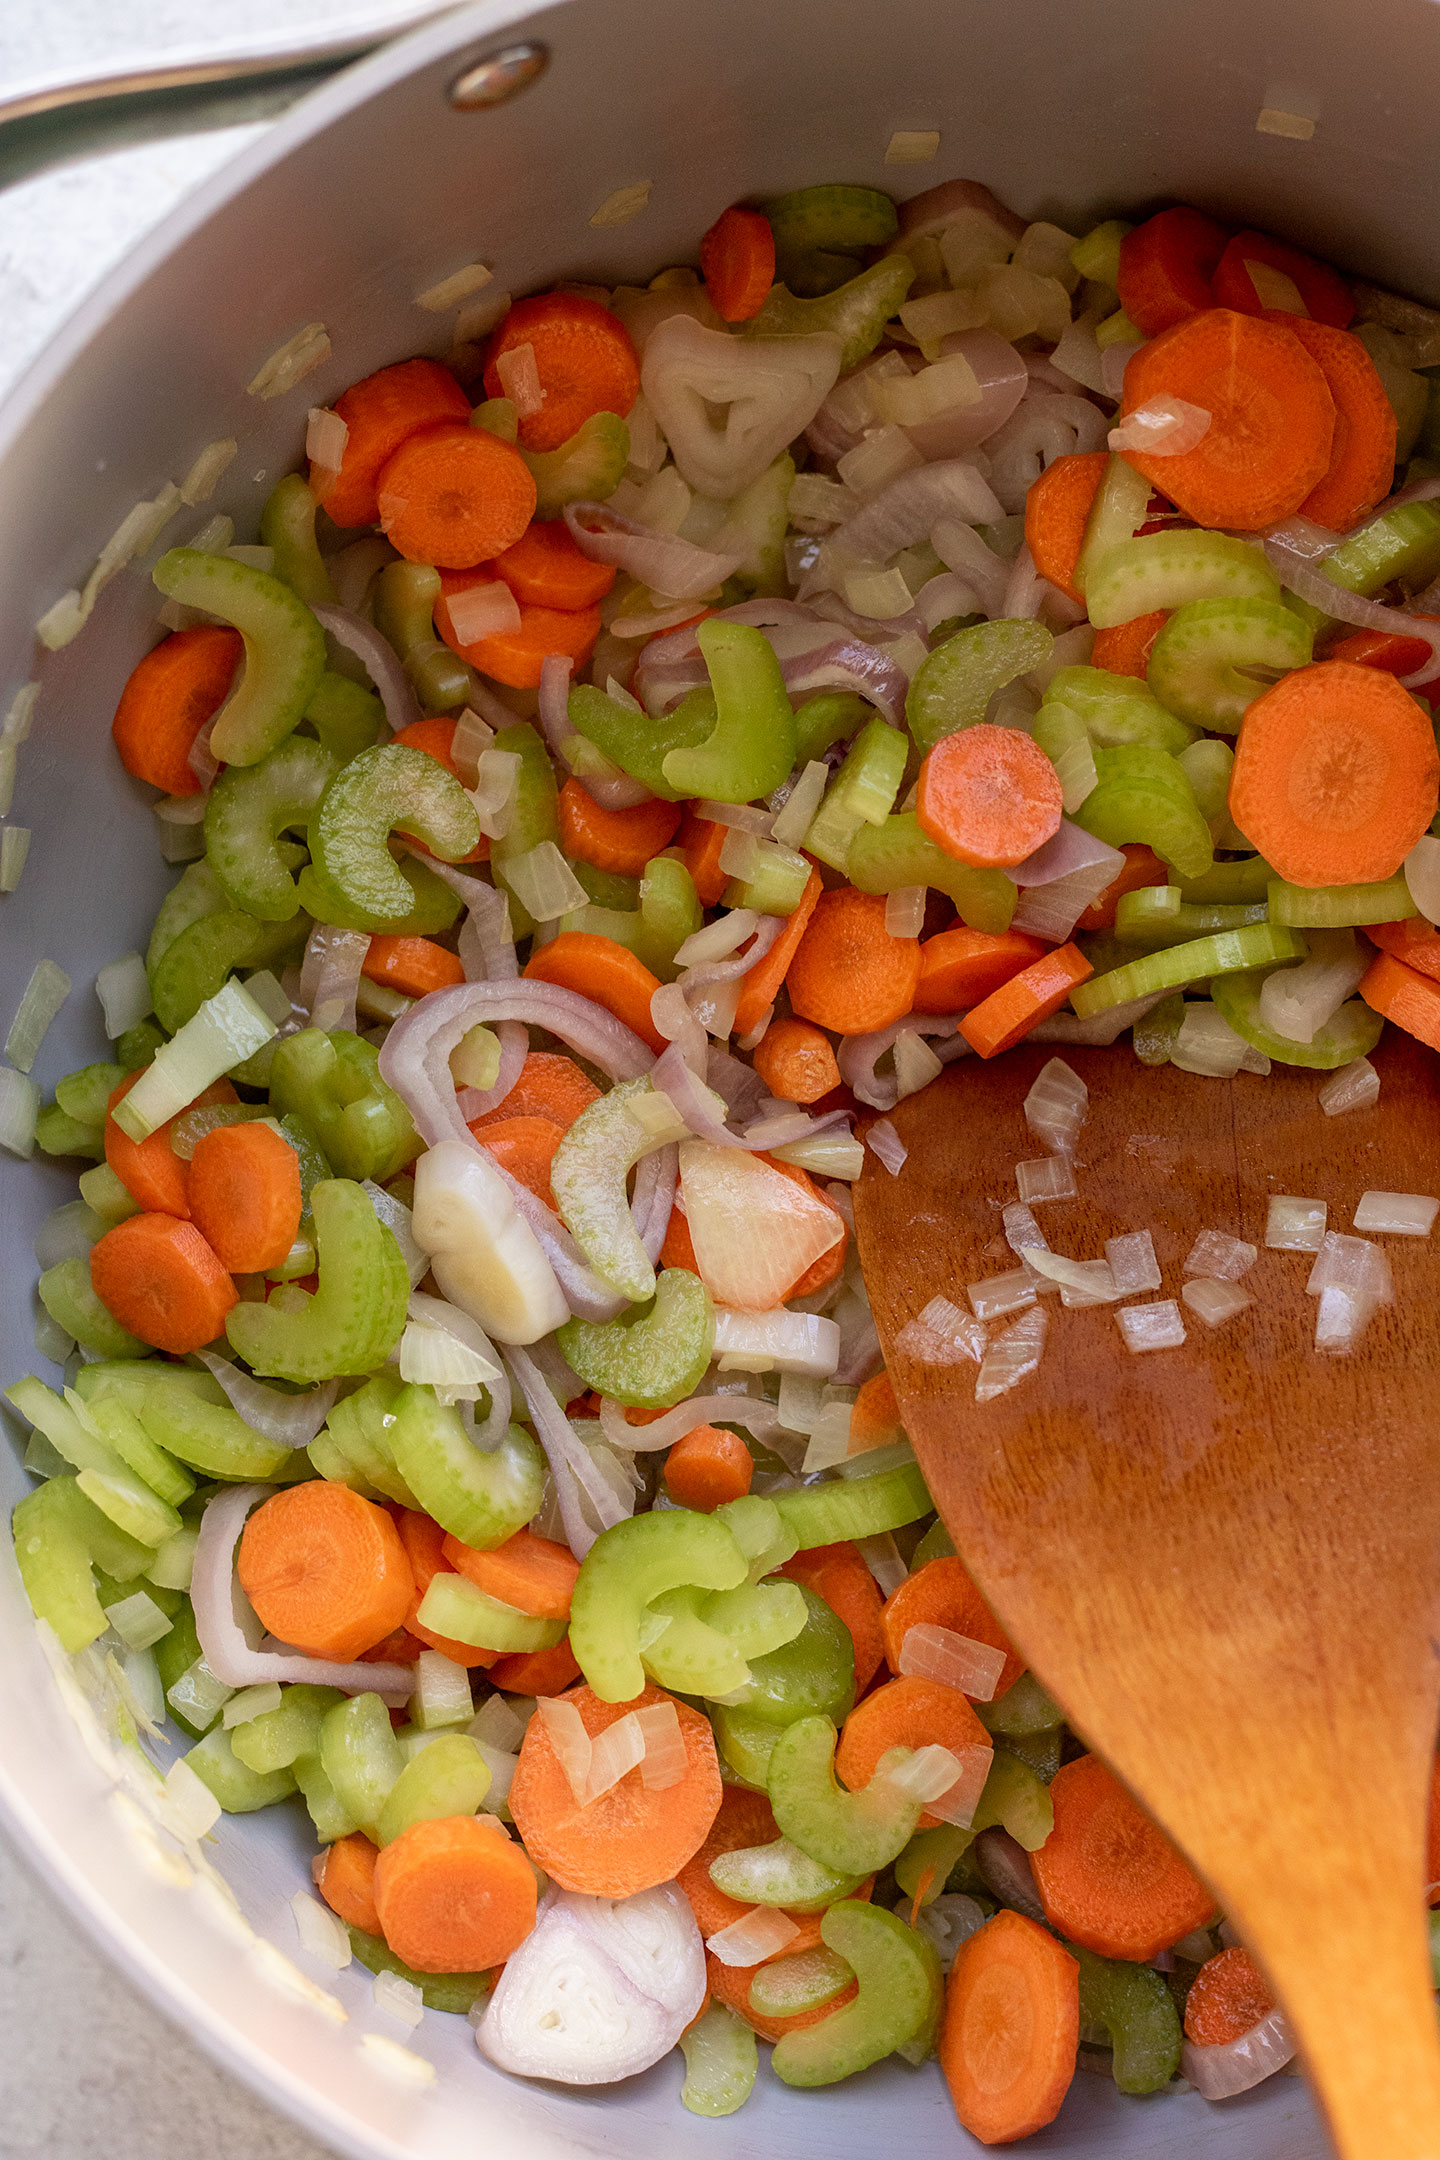 Sauteing the carrots, celery and onions together in a large pot.